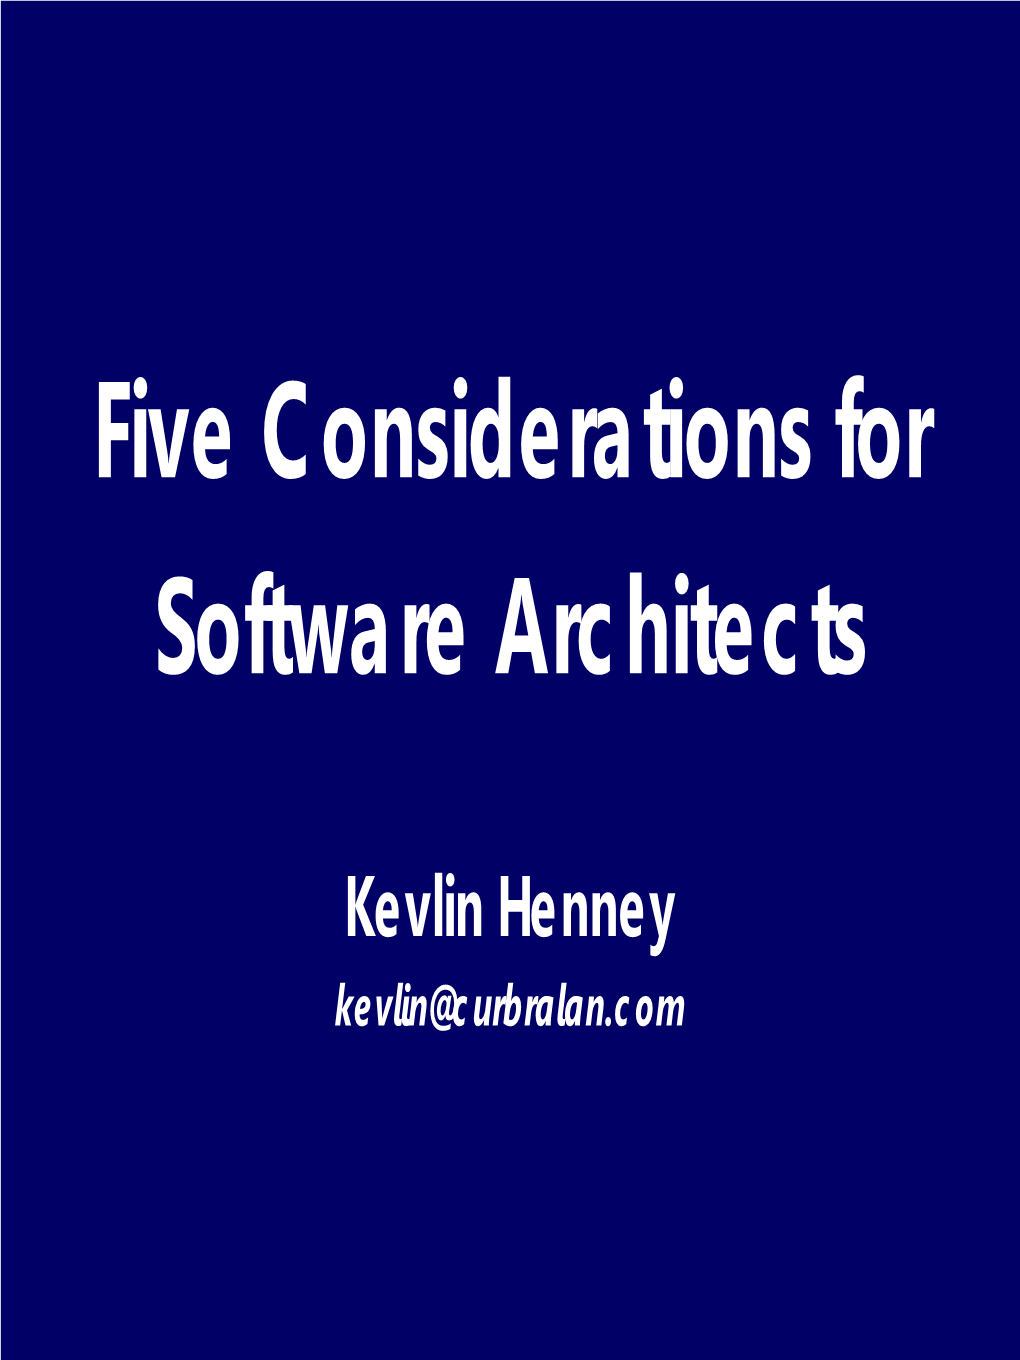 Five Considerations for Software Architects